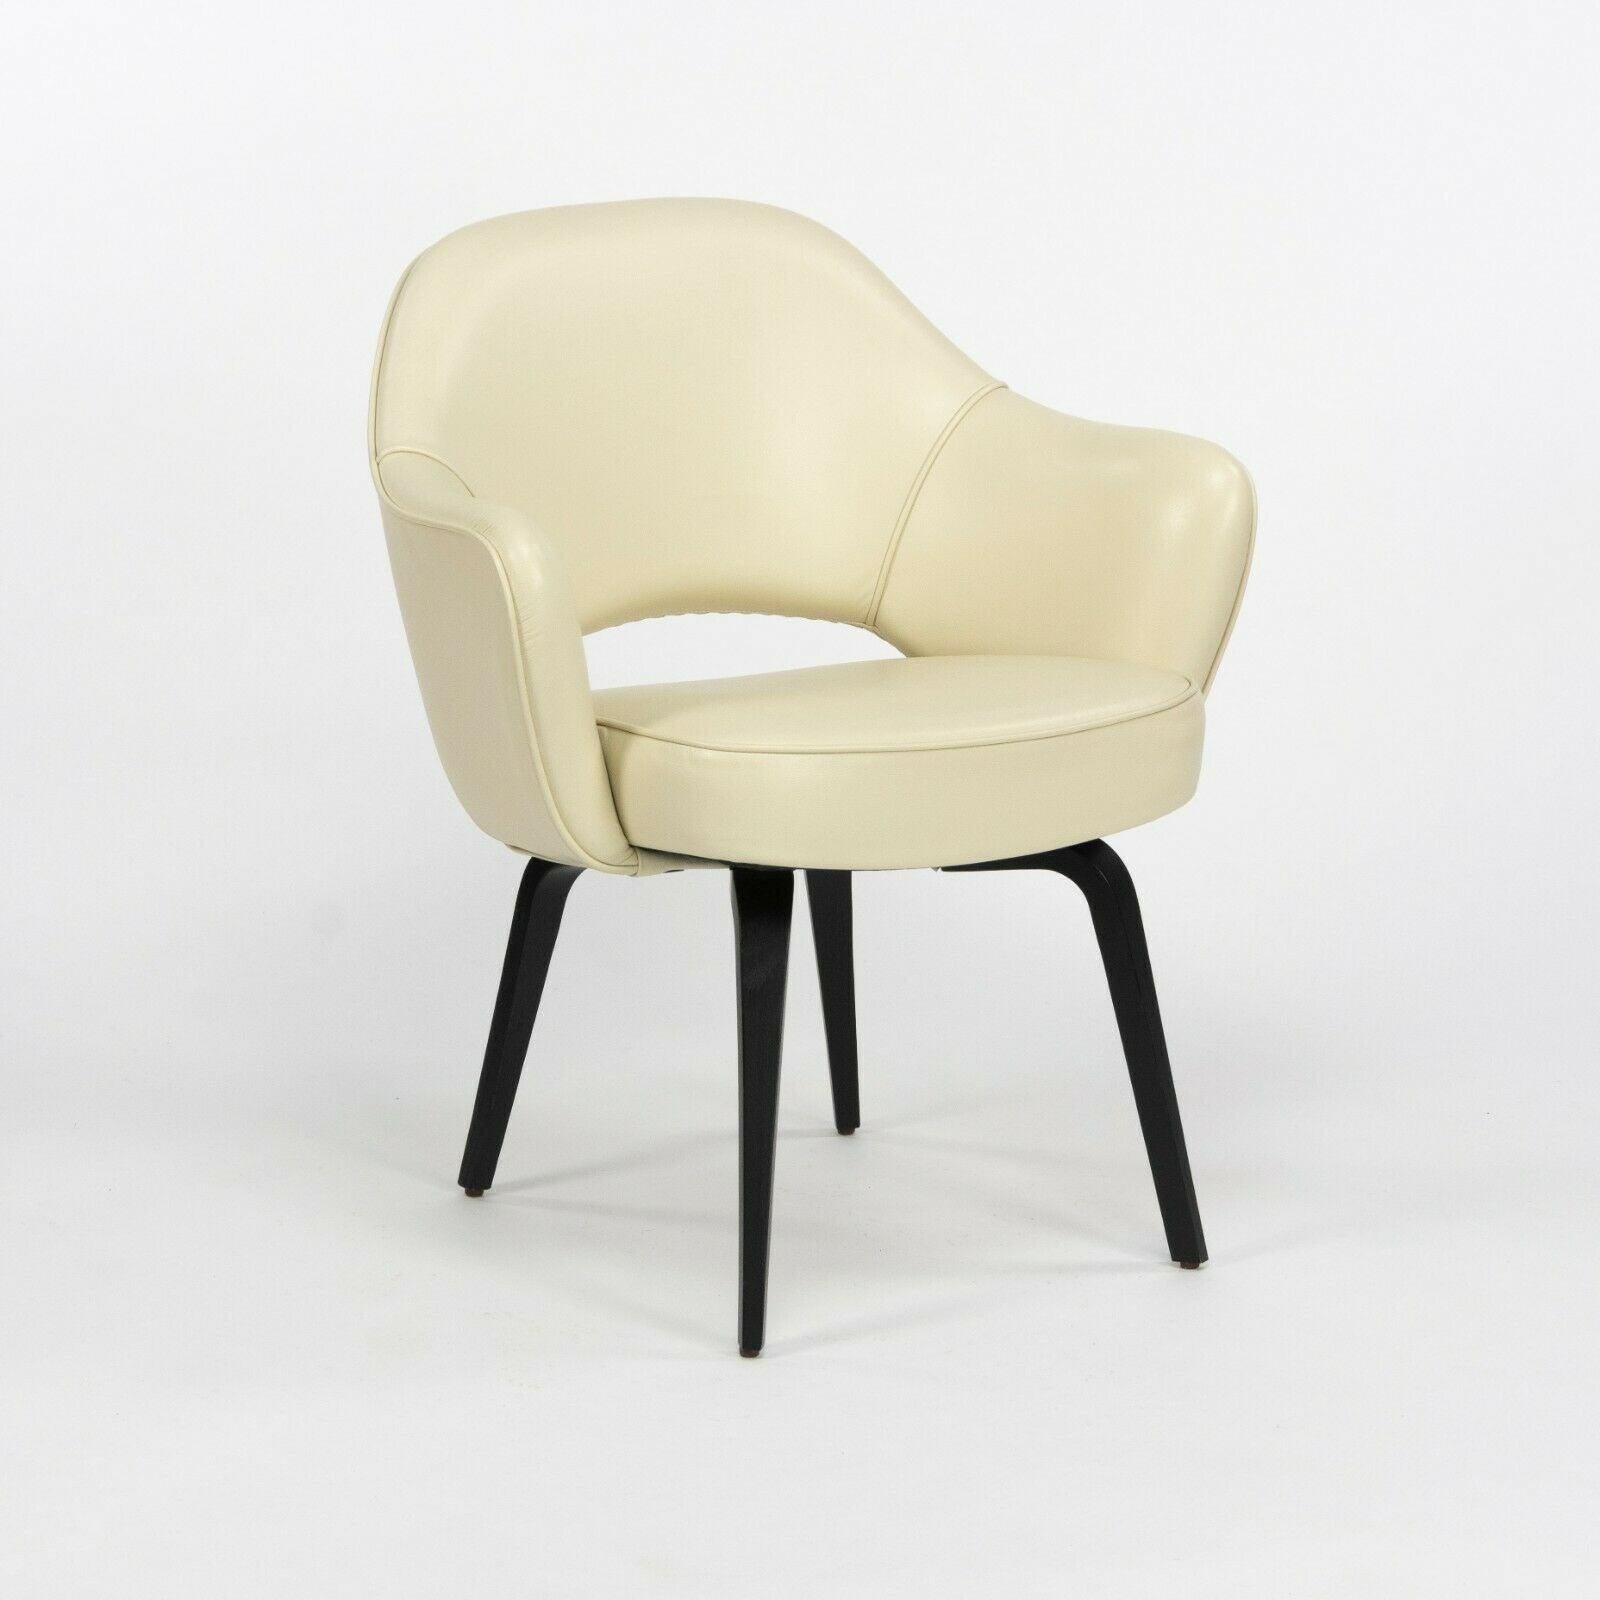 Modern Eero Saarinen for Knoll 2020 Executive Armchair with Ivory Leather & Wood Legs For Sale